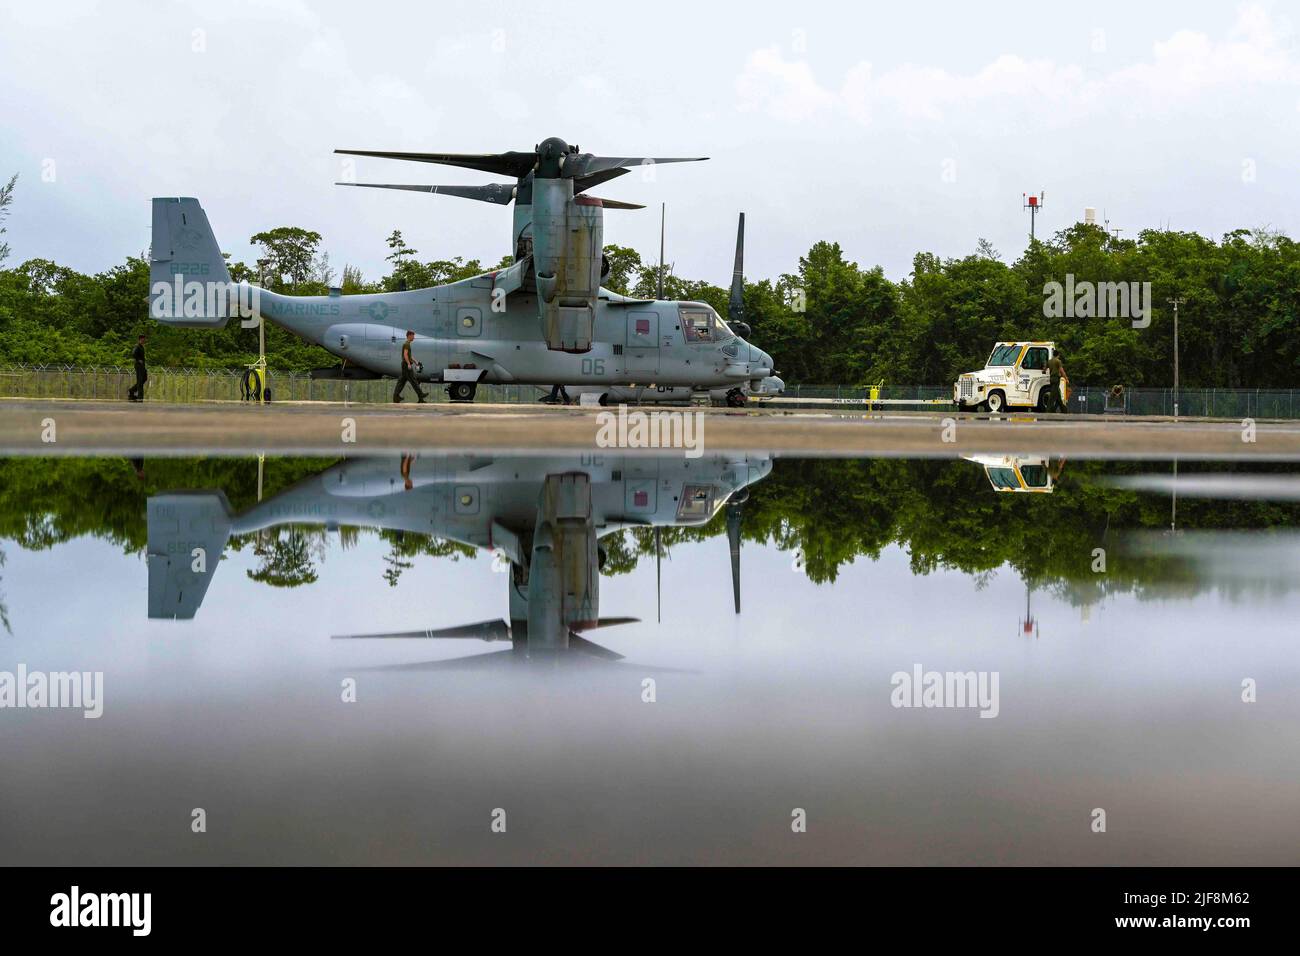 June 15, 2022 - Carolina, Puerto Rico - An MV-22B Osprey assigned to Marine Medium Tiltrotor Squadron (VMM) 266 is towed across the airfield during the French-Caribbean exercise Caraibes 22 at Muniz Air National Guard Base, Carolina, Puerto Rico, June 15, 2022. Caraibes 22 is a French-led, large-scale, joint-training exercise in the Caribbean involving naval, air, and land assets from the French, U.S., and regional forces focused on responding to simulated-natural disasters. During the exercise, the 156th Wing was the main operating hub in support of VMM-266 by providing fuel, aircraft marshal Stock Photo